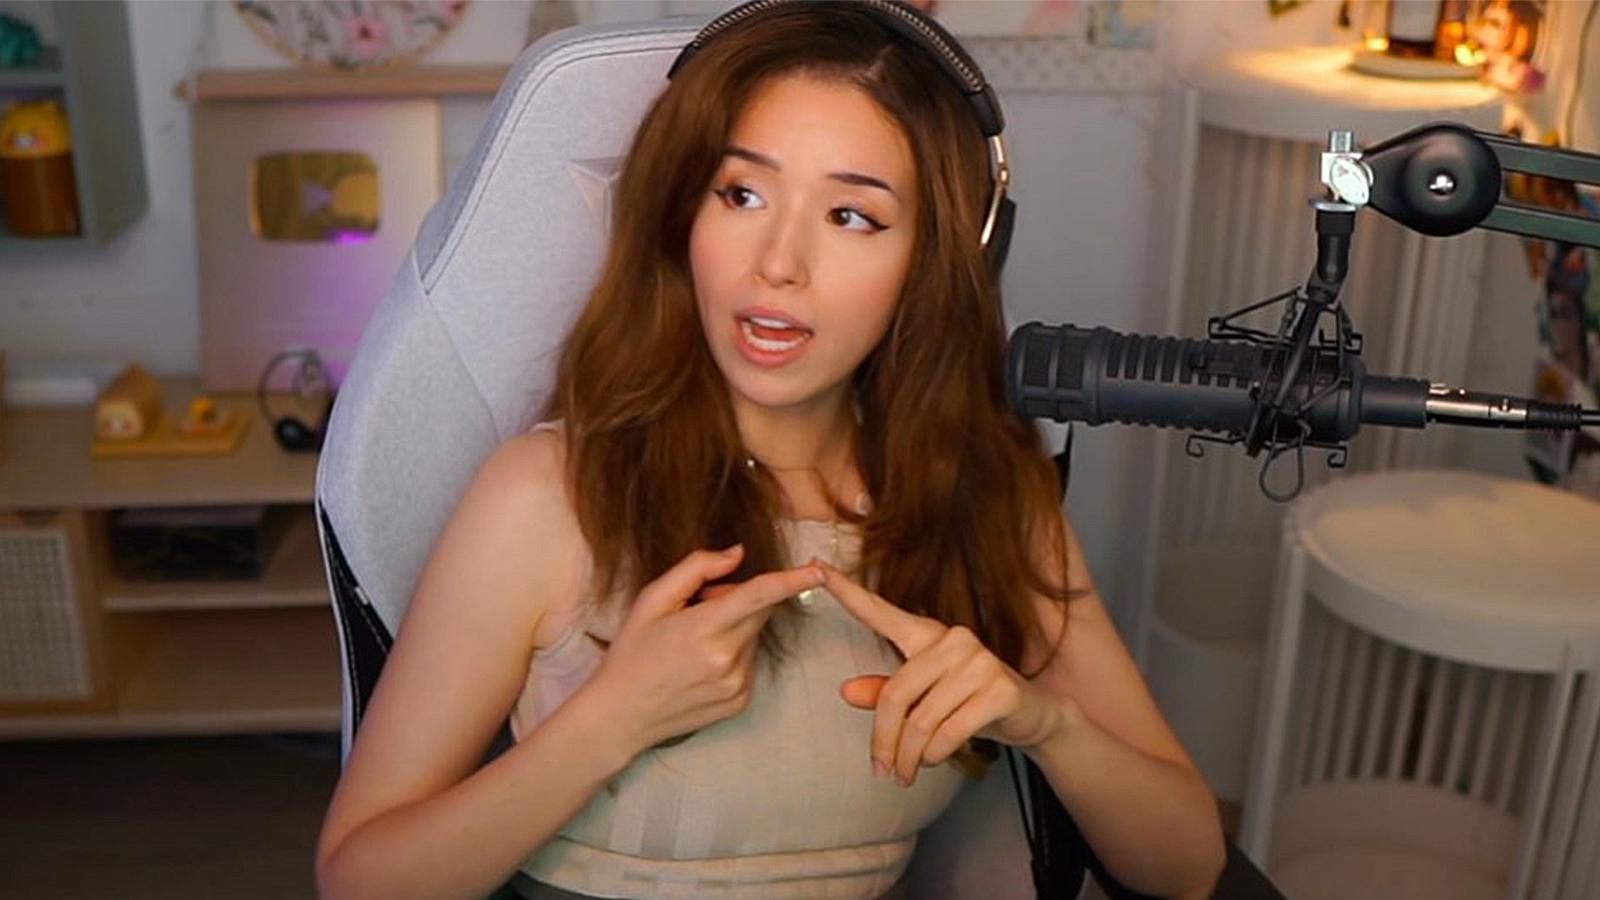 Pokimane destroys troll for saying she's wearing way too much makeup